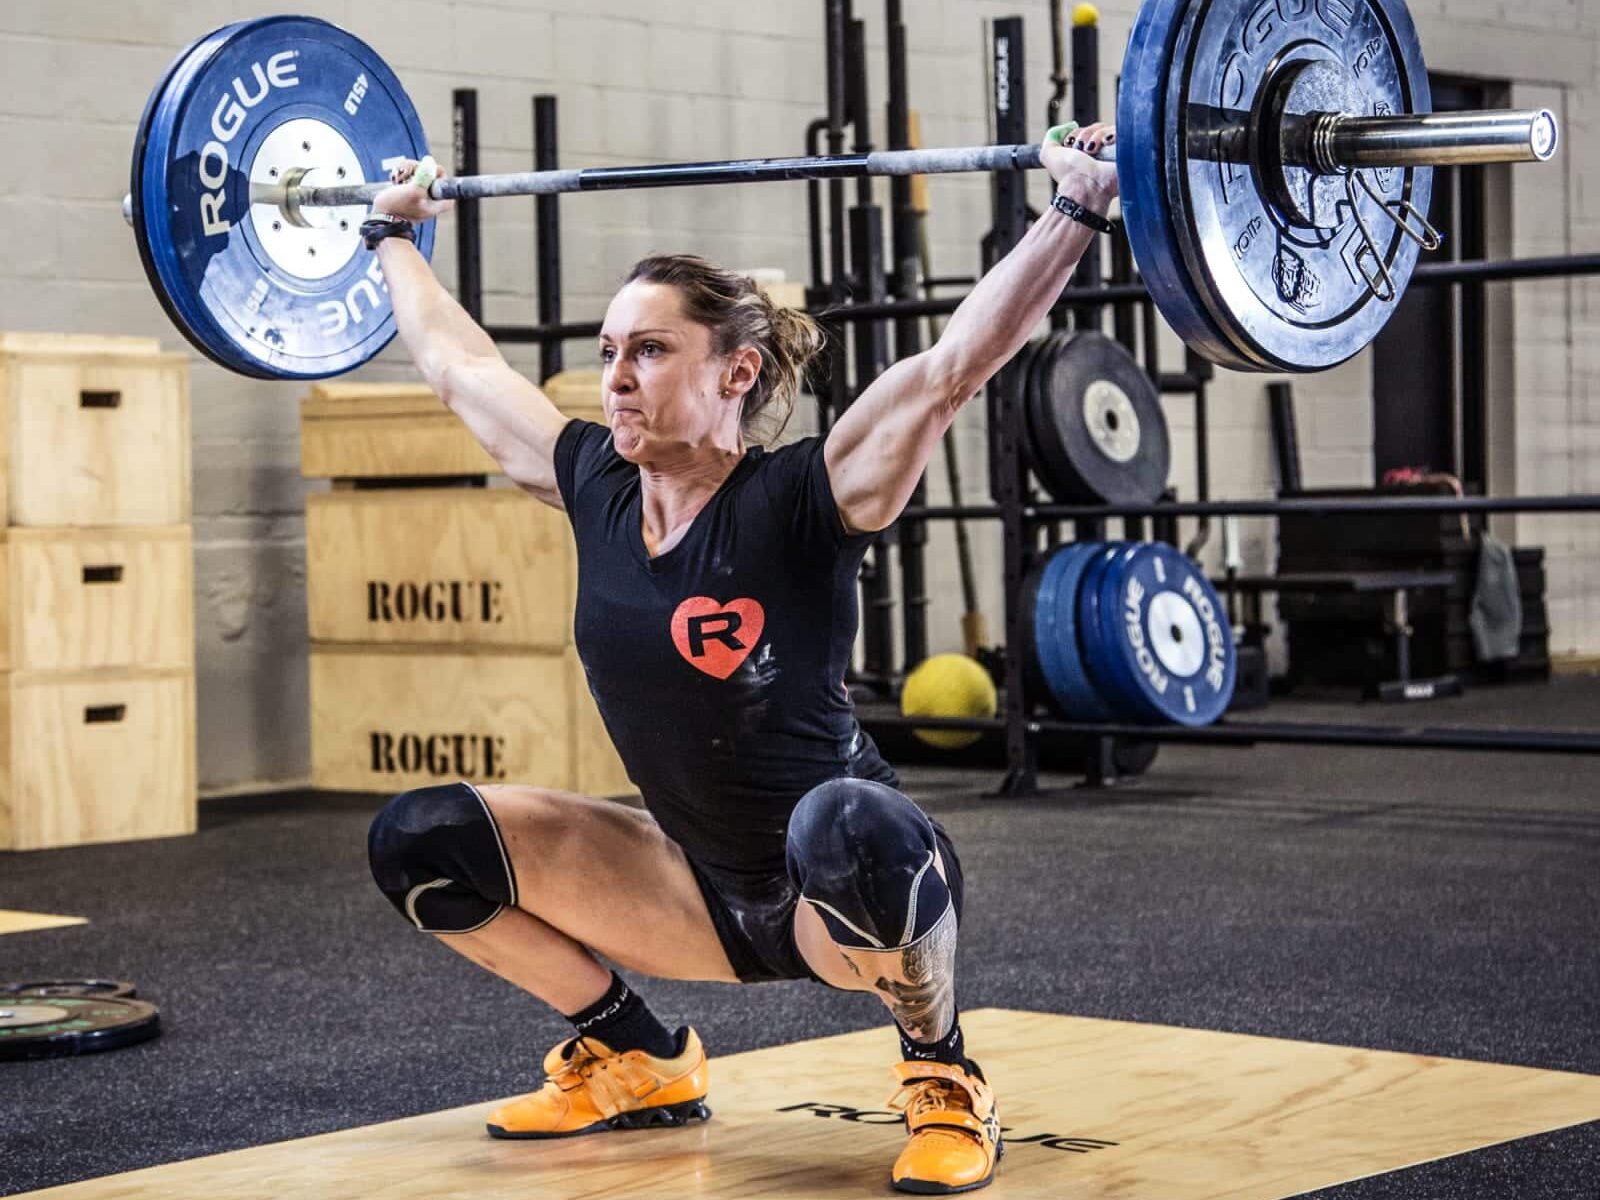 female lifter performing a snatch